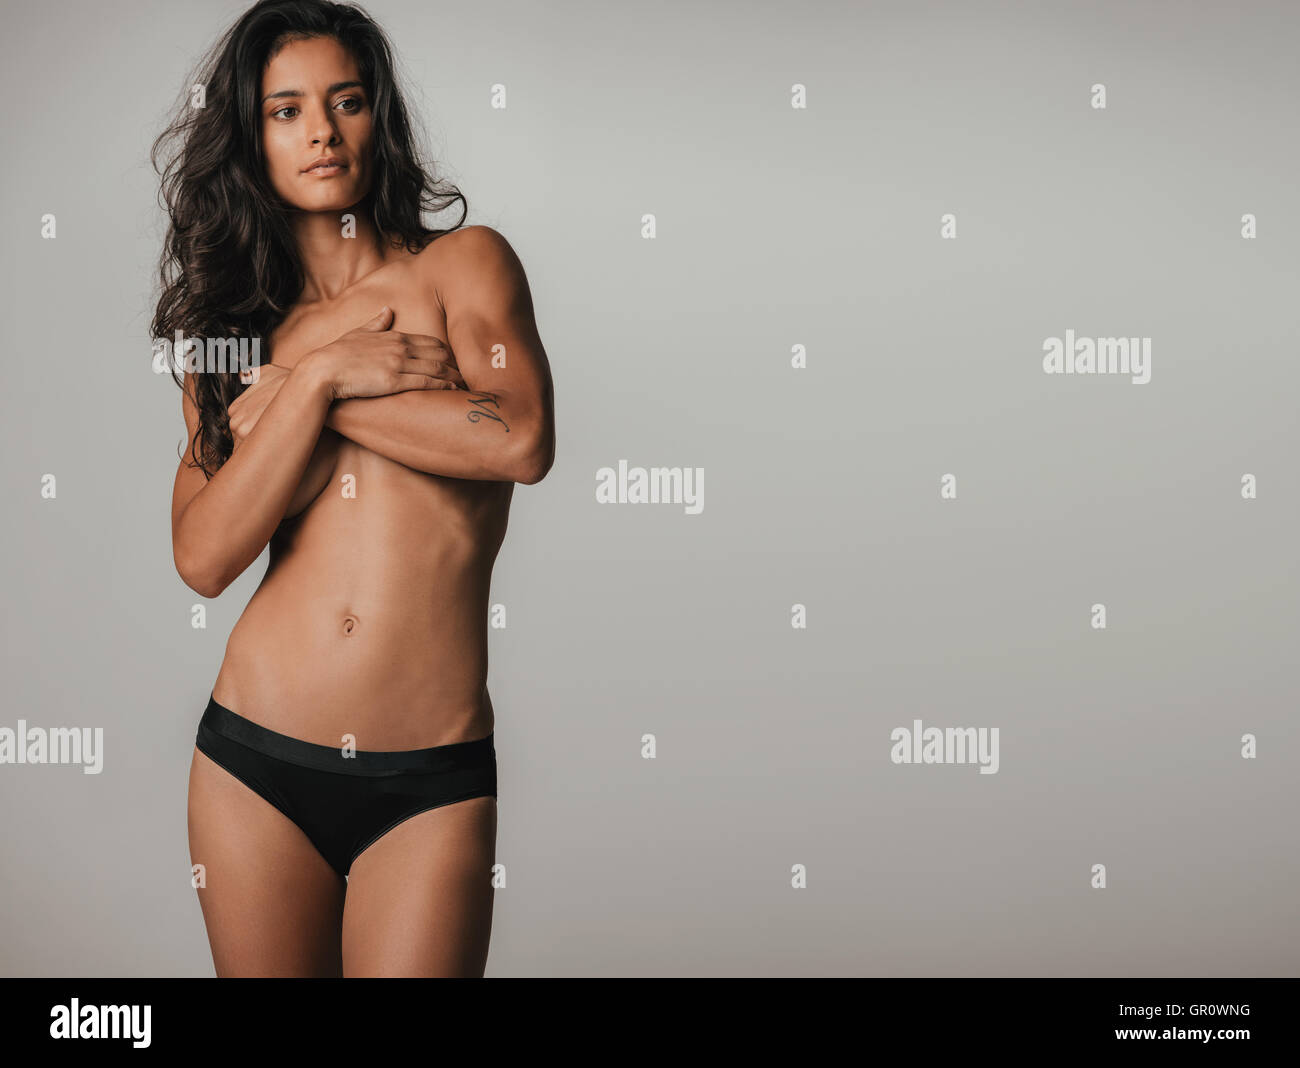 Single beautiful woman in black underwear covering breasts over gray background with copy space Stock Photo